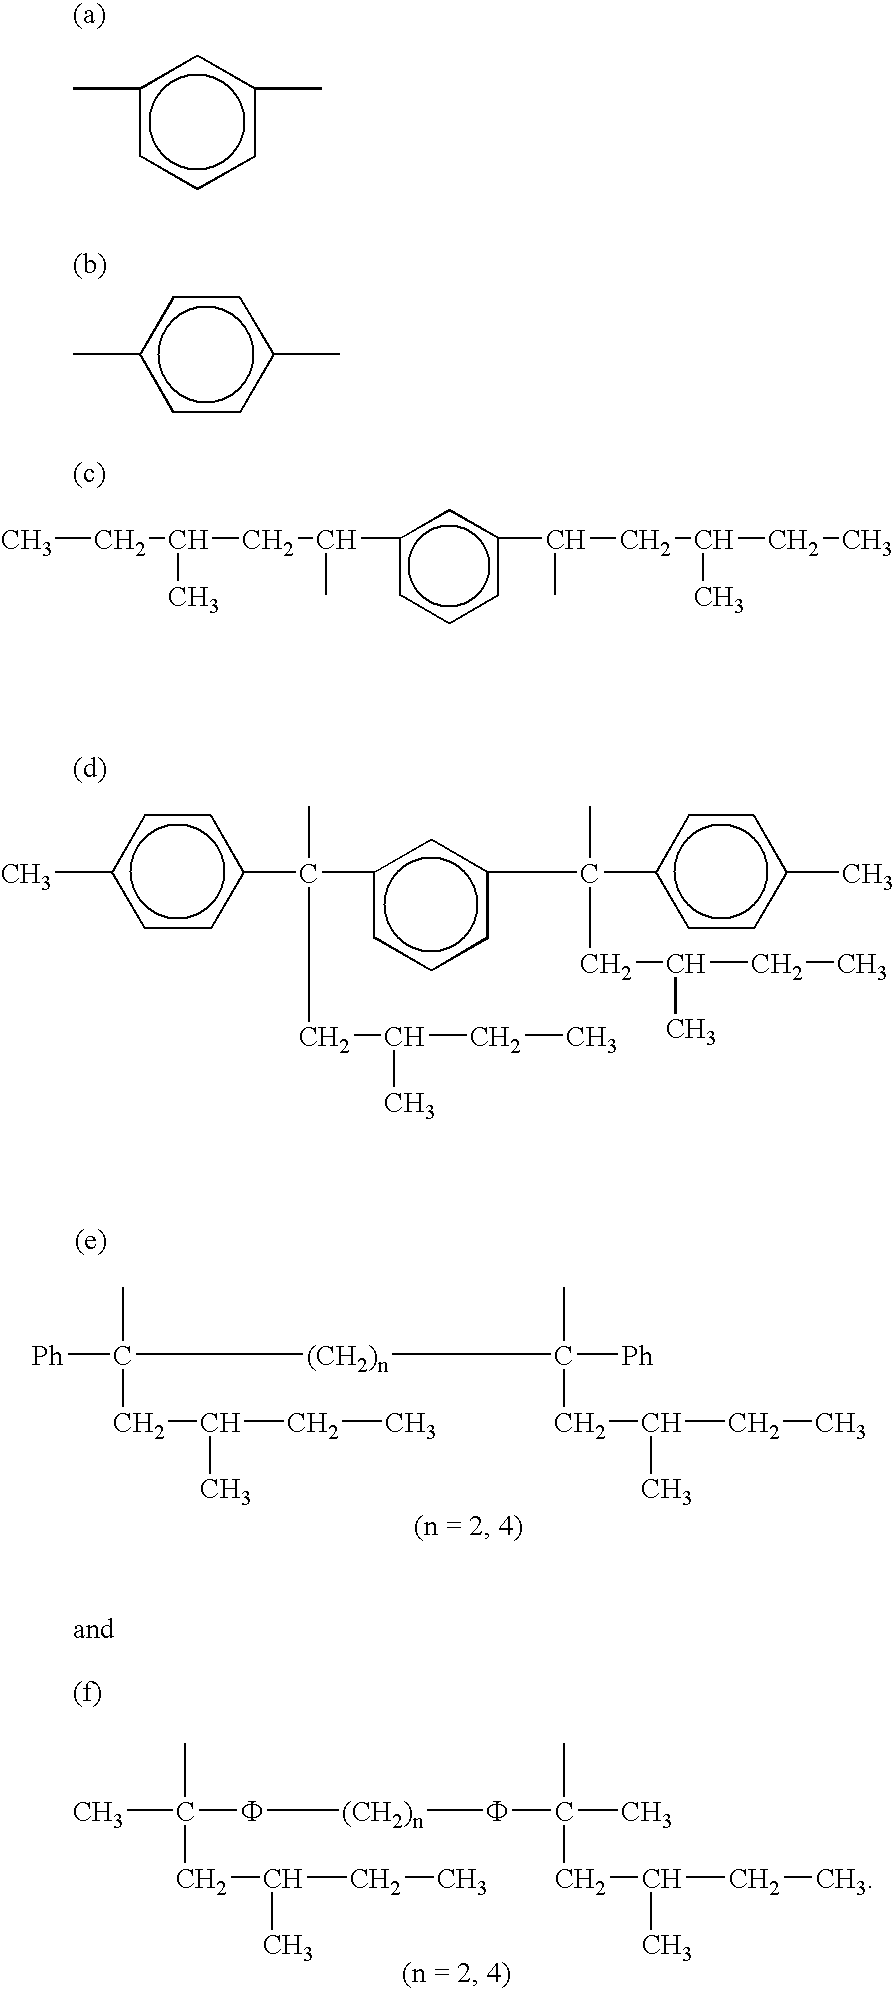 Tin-containing organolithium compounds and preparation thereof